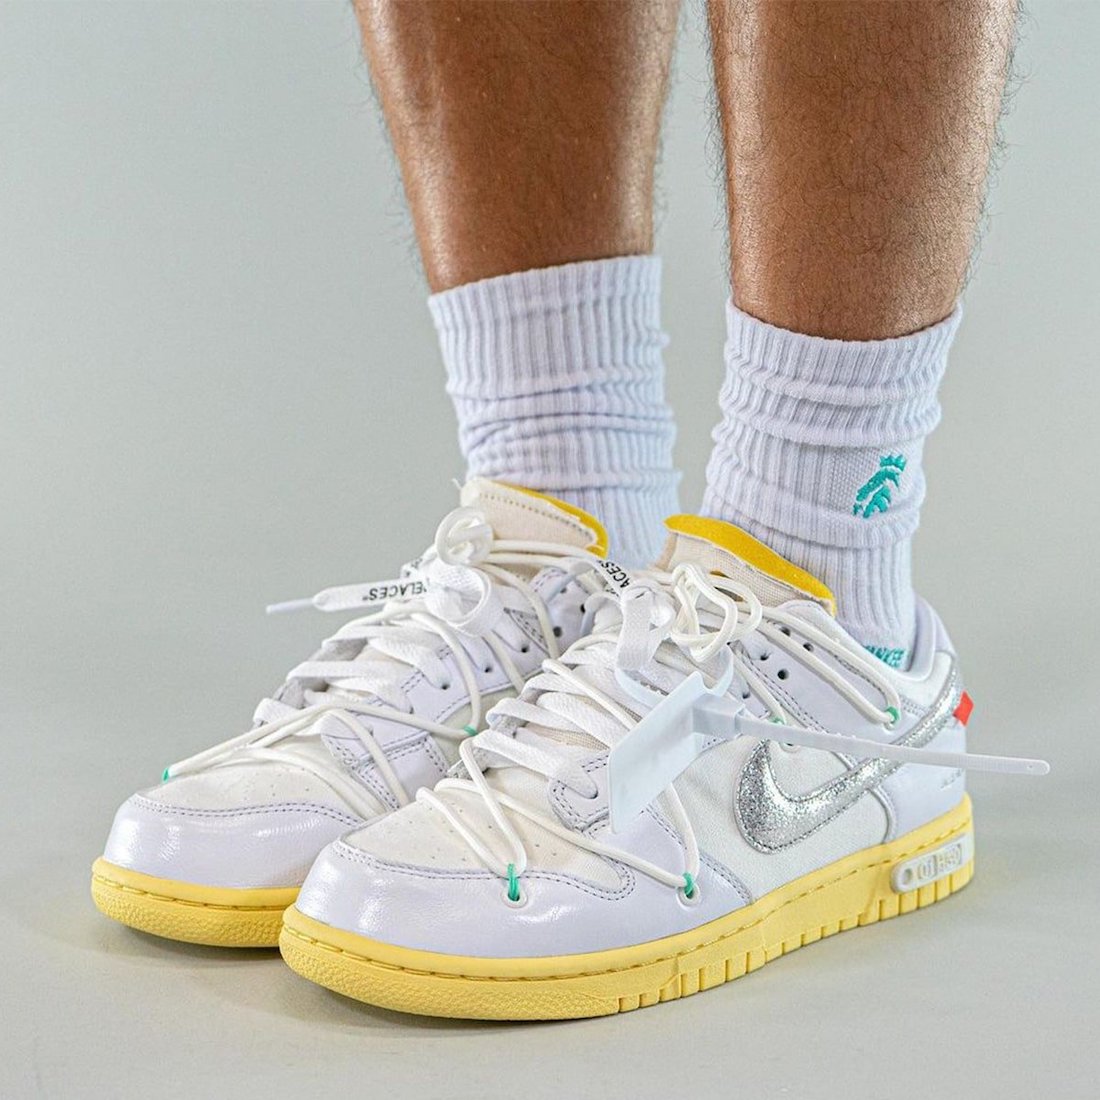 nike dunk low 50 of 1 off-white 20